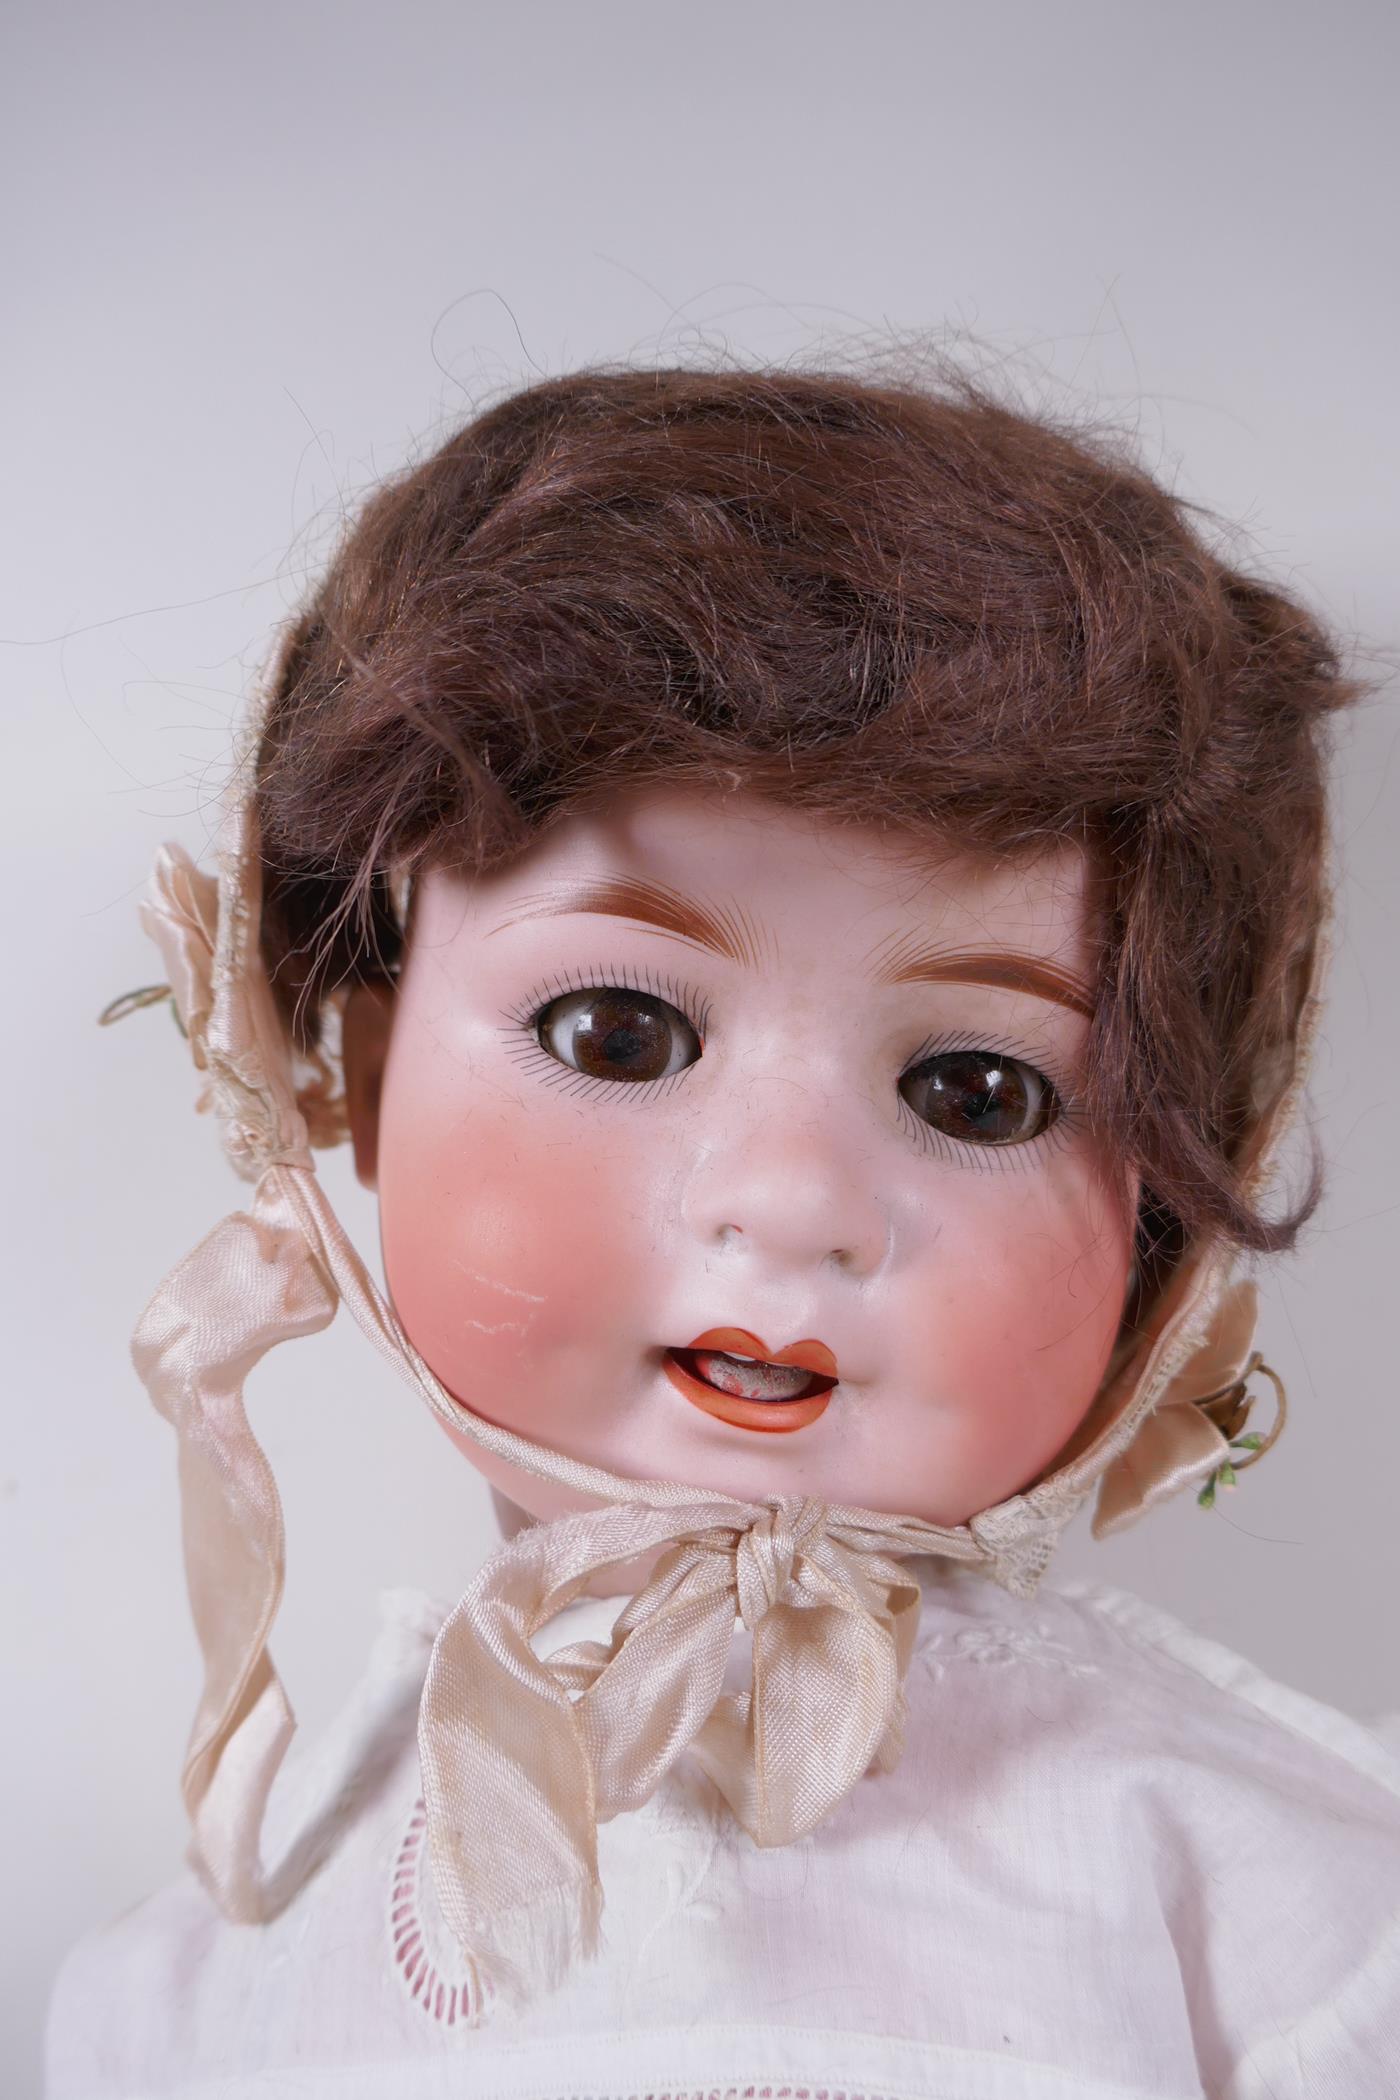 An antique German Heubach Koppelsdorf bisque headed toddler doll with brown sleeping eyes, moving - Image 2 of 5